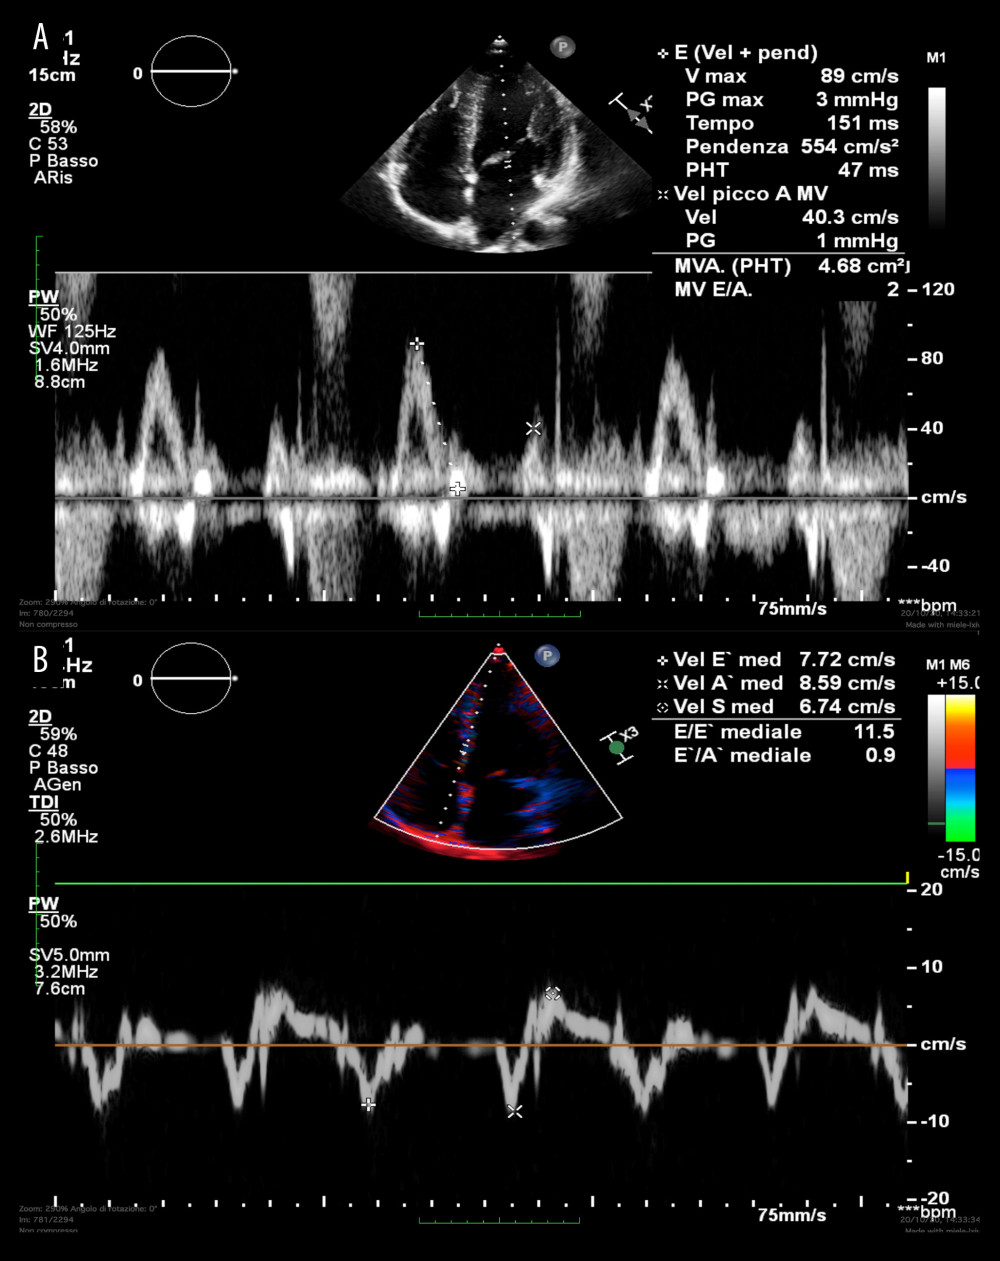 Transthoracic echocardiogram. (A) Pulsed Wave showing normal E/A wave ratio. (B) Tissue Doppler (TDI) showing inversion of E’/A’ ratio, with a 11.5 E/e’ ratio.